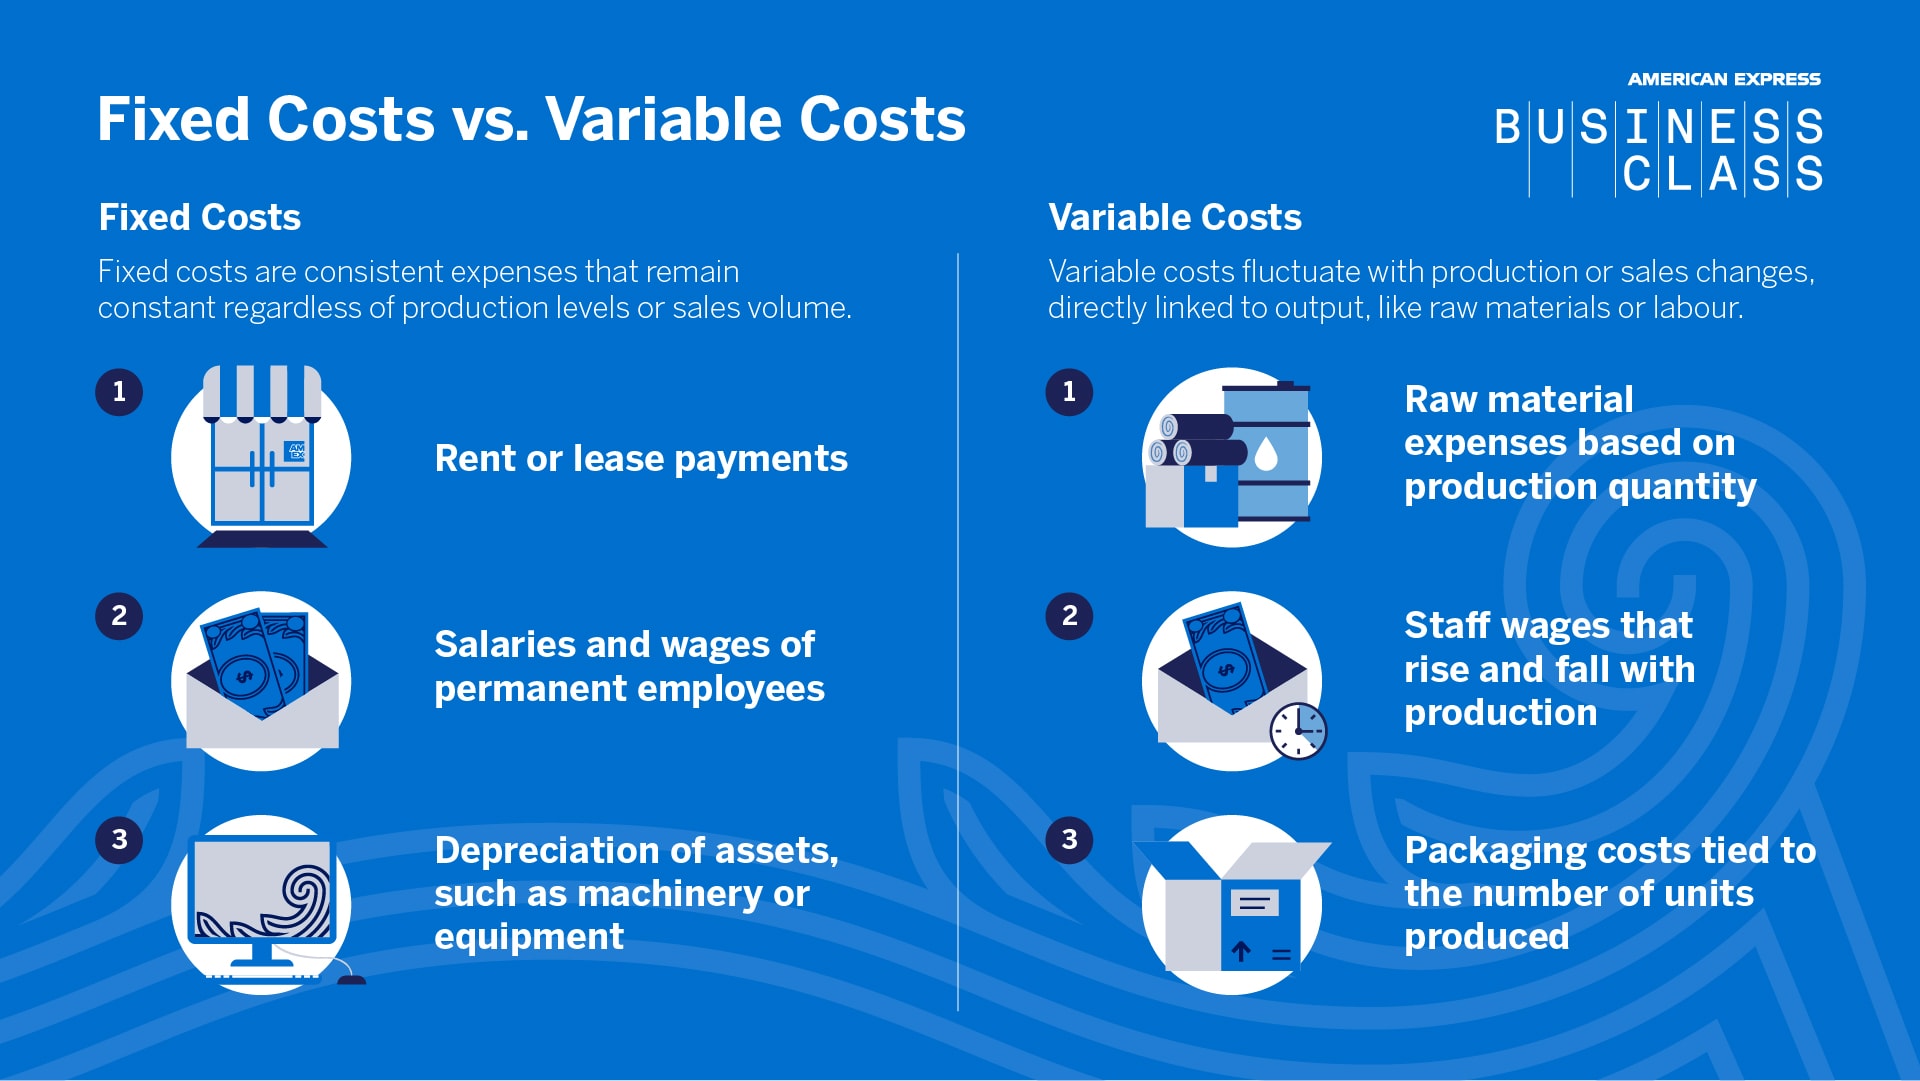 Amex_Graphic_Fixed_vs_Variable_Costs_V3